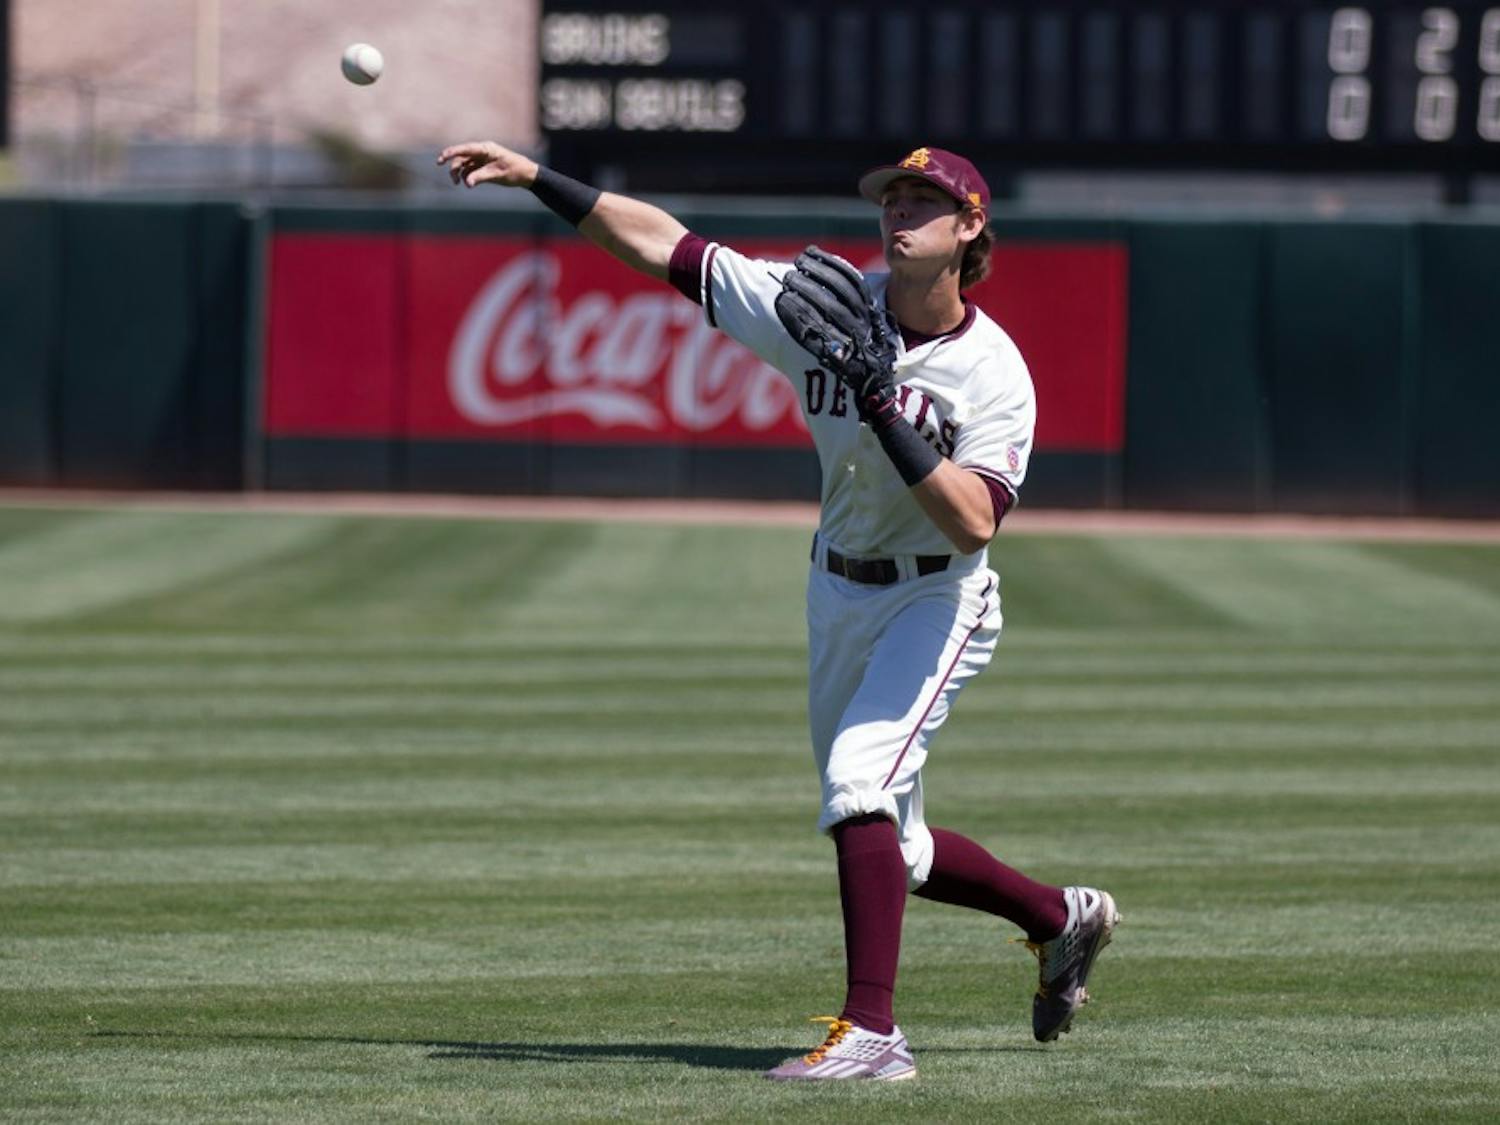 ASU junior infielder Andrew Snow (4) catches the relay and throws the ball to the plate during game three of a baseball series against the UCLA Bruins at Phoenix Municipal Stadium in Phoenix on April 2, 2017.